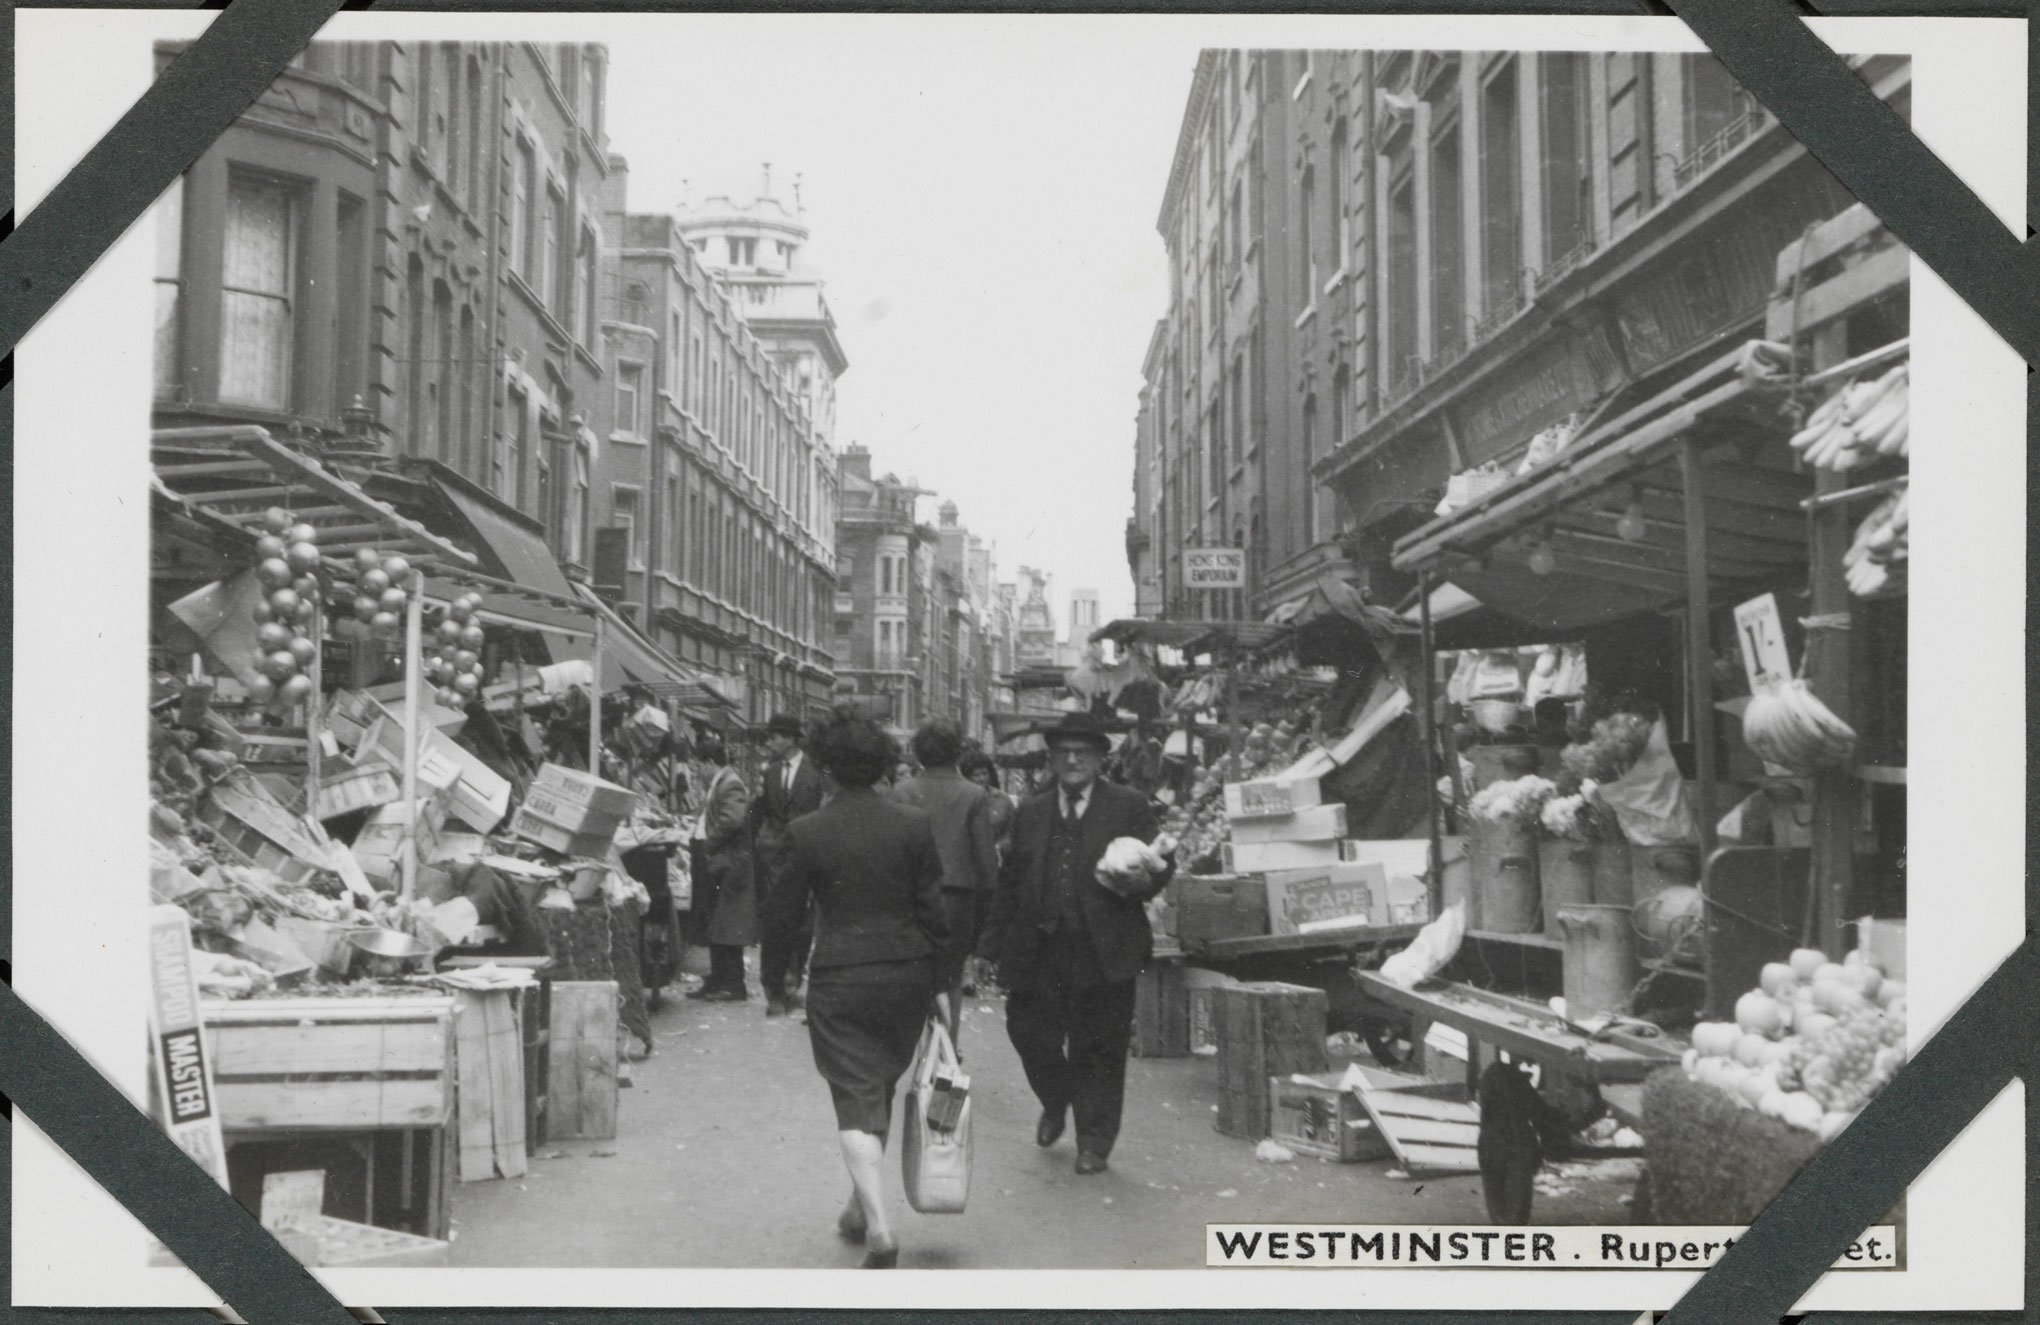 Black and white photograph of an urban street scene featuring people walking in a road flanked by market stalls set out in front of rows of stone-fronted buildings of multiple storeys. 